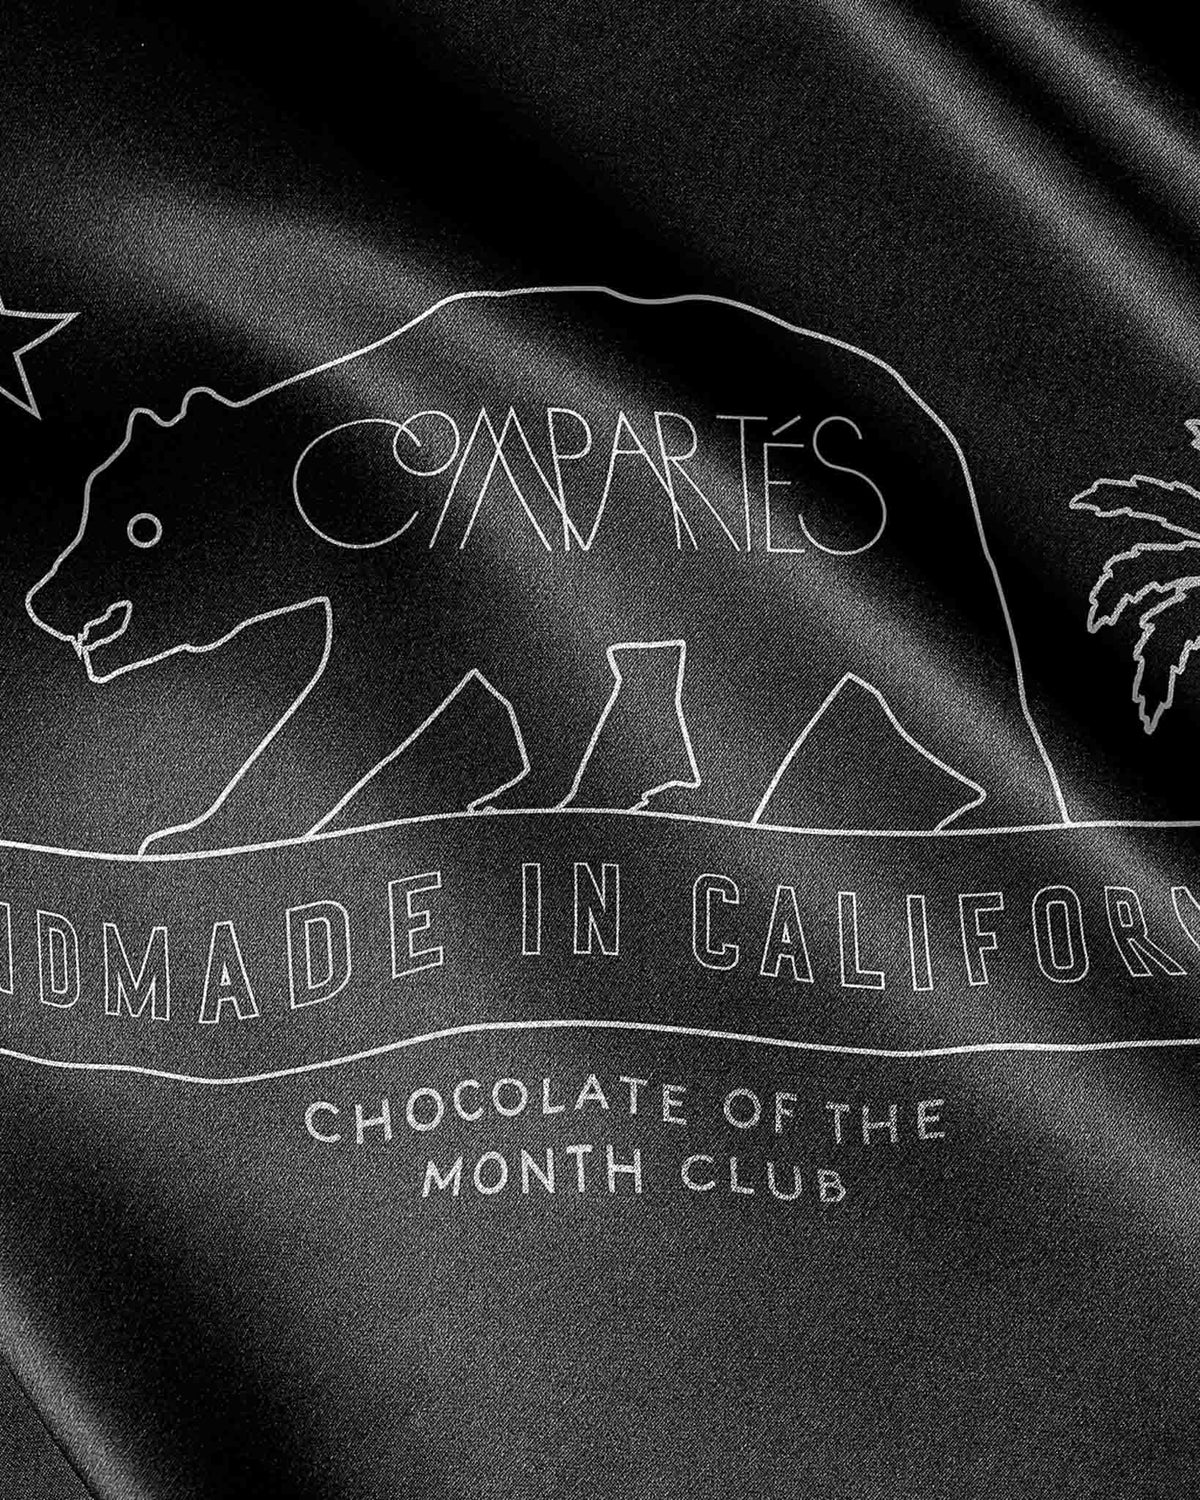 Gourmet Chocolate Gift - Chocolate Of the Month Club - Chocolate Subscription by Compartes Los Angeles